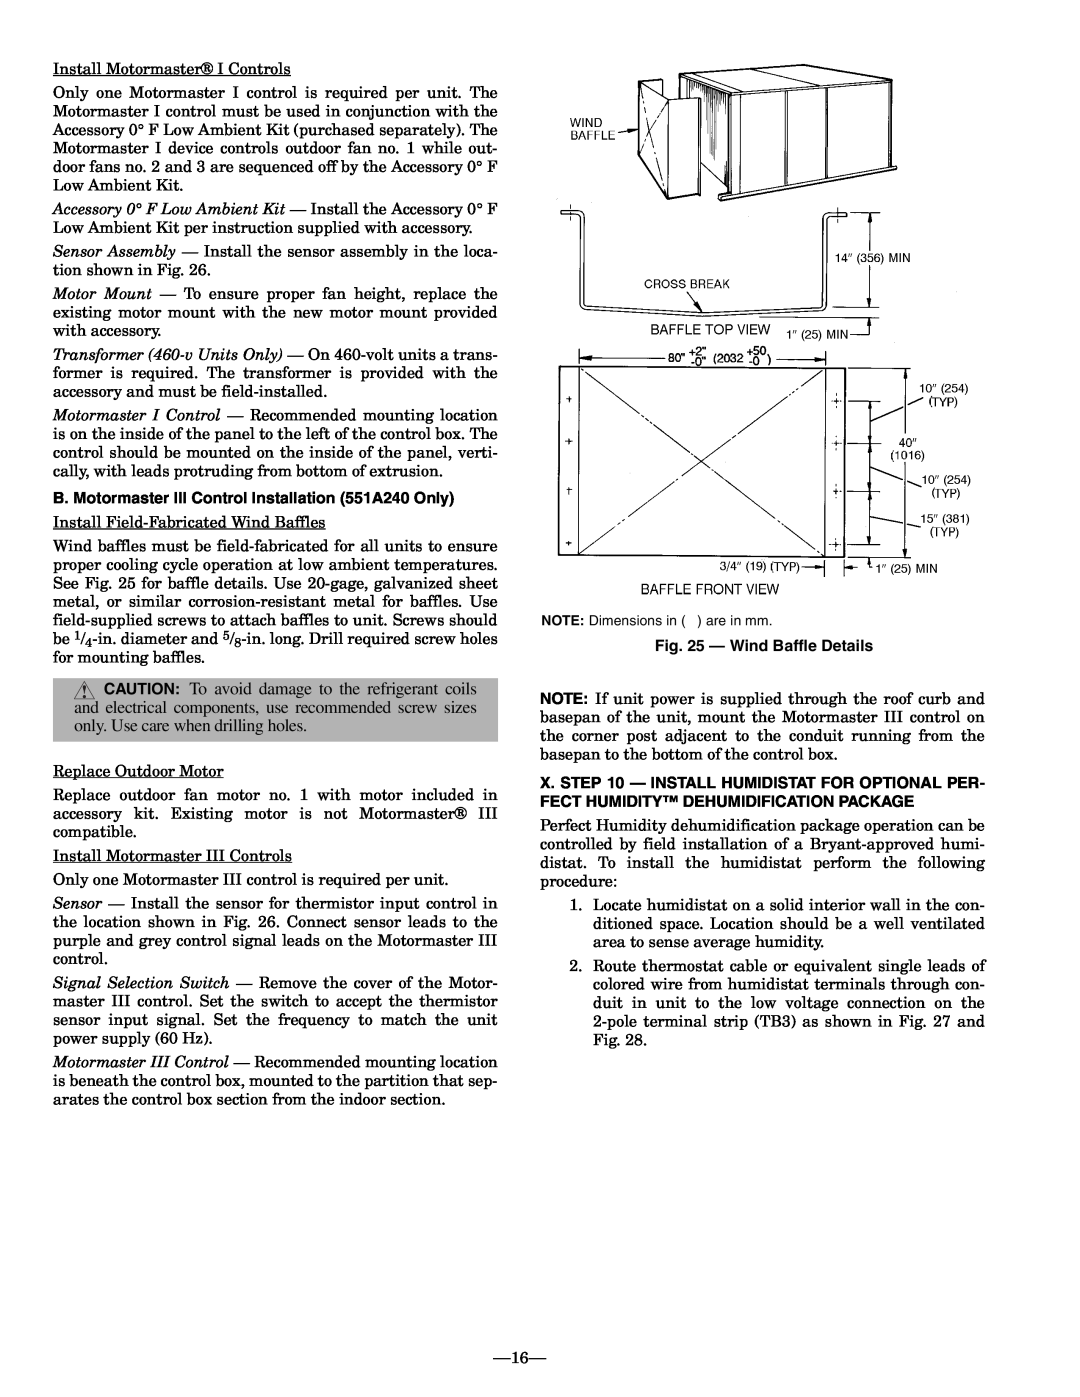 Bryant 551A operation manual 16, Wind Baffle Details 